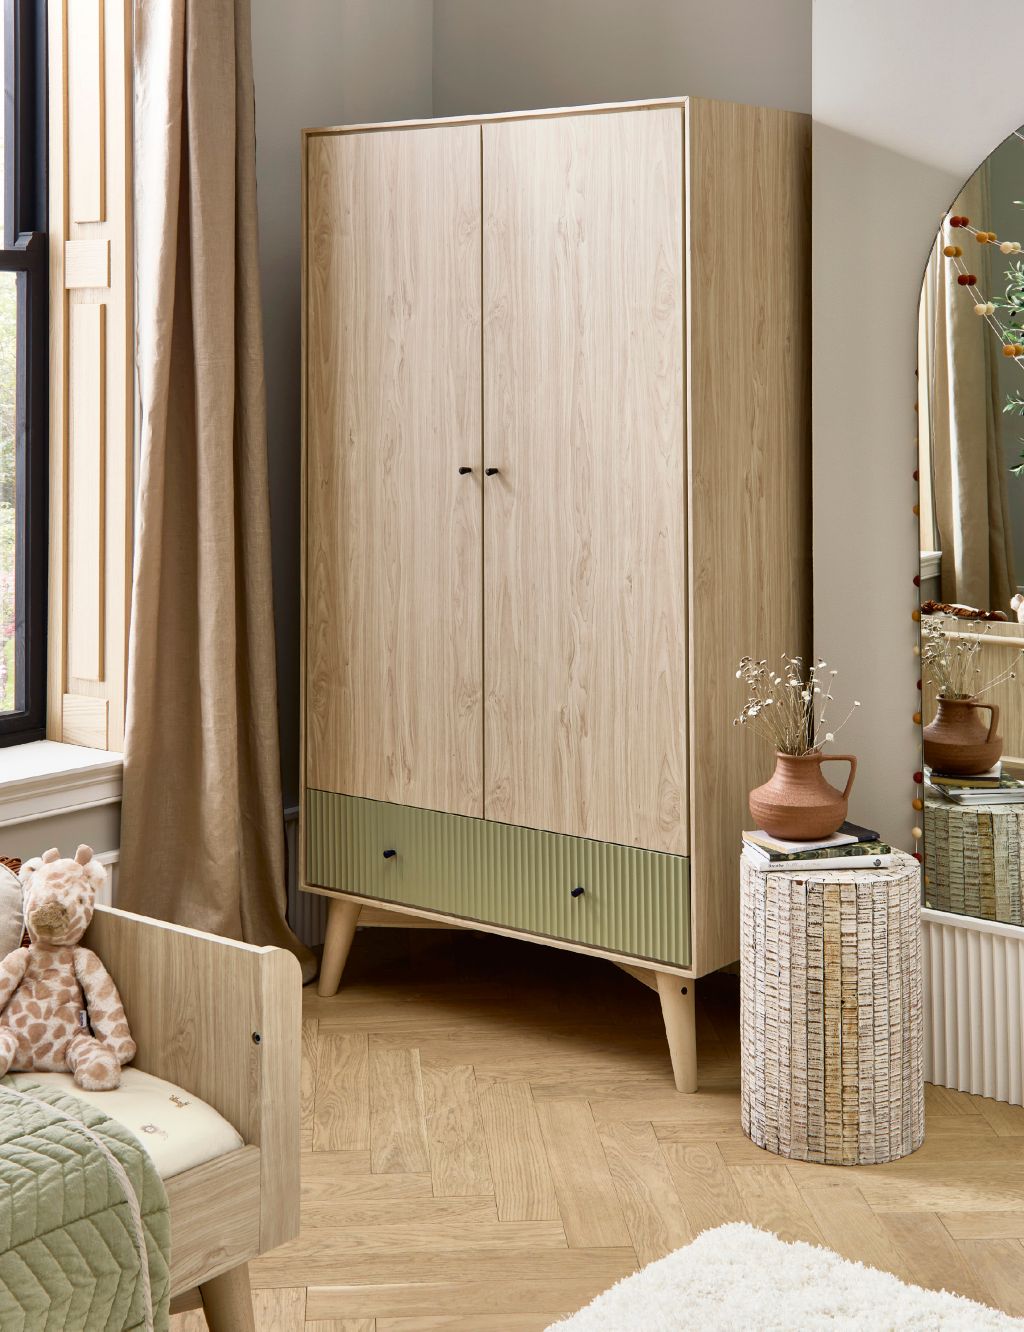 Coxley 3 Piece Cotbed Range with Dresser and Wardrobe image 6